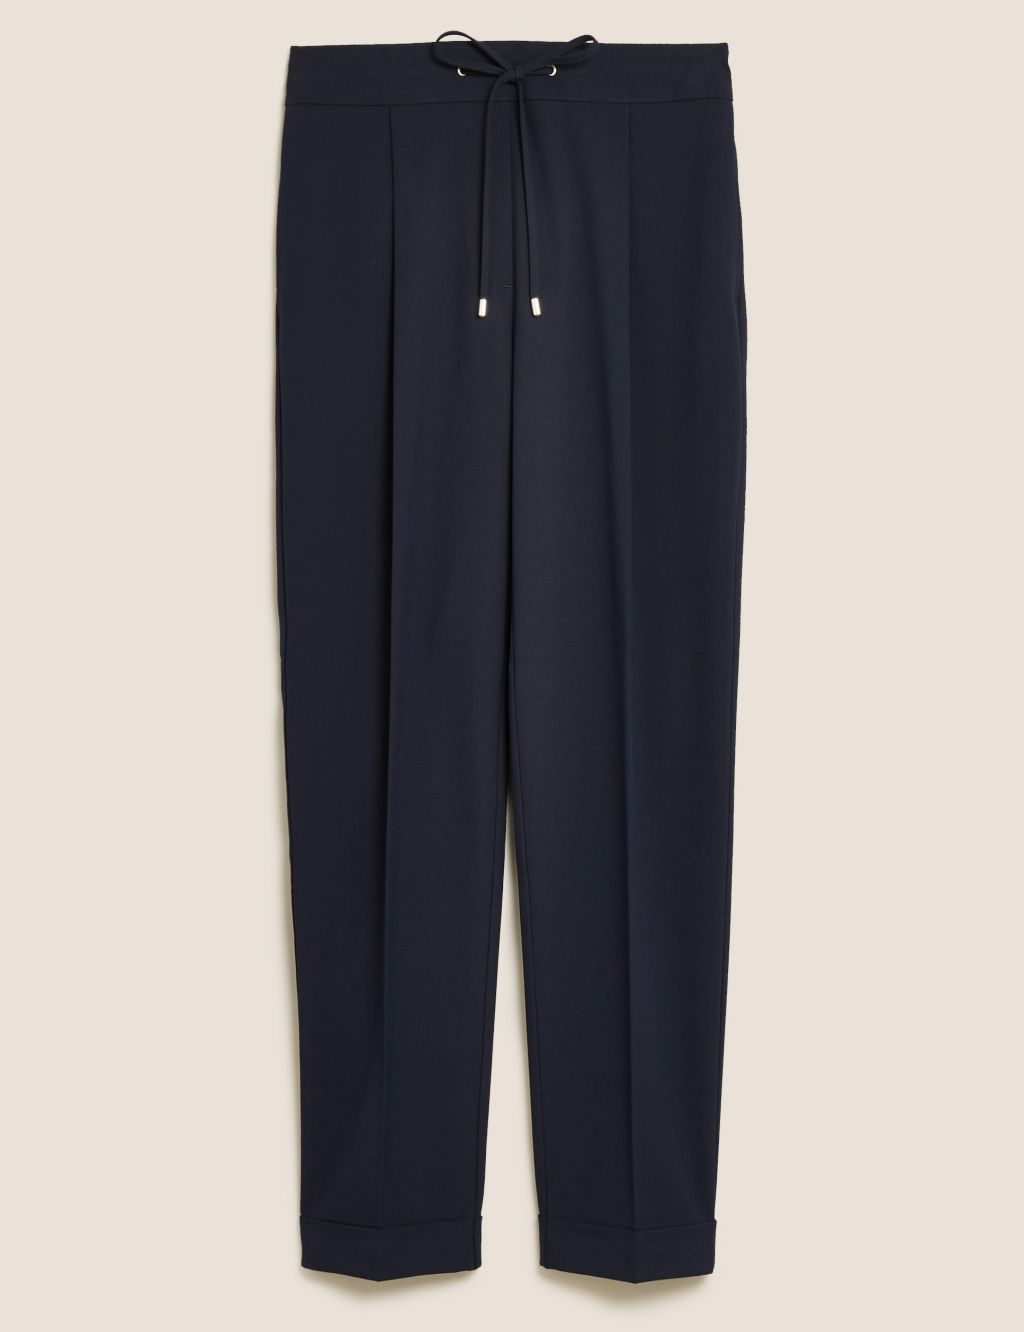 Drawstring Tapered Ankle Grazer Trousers image 2